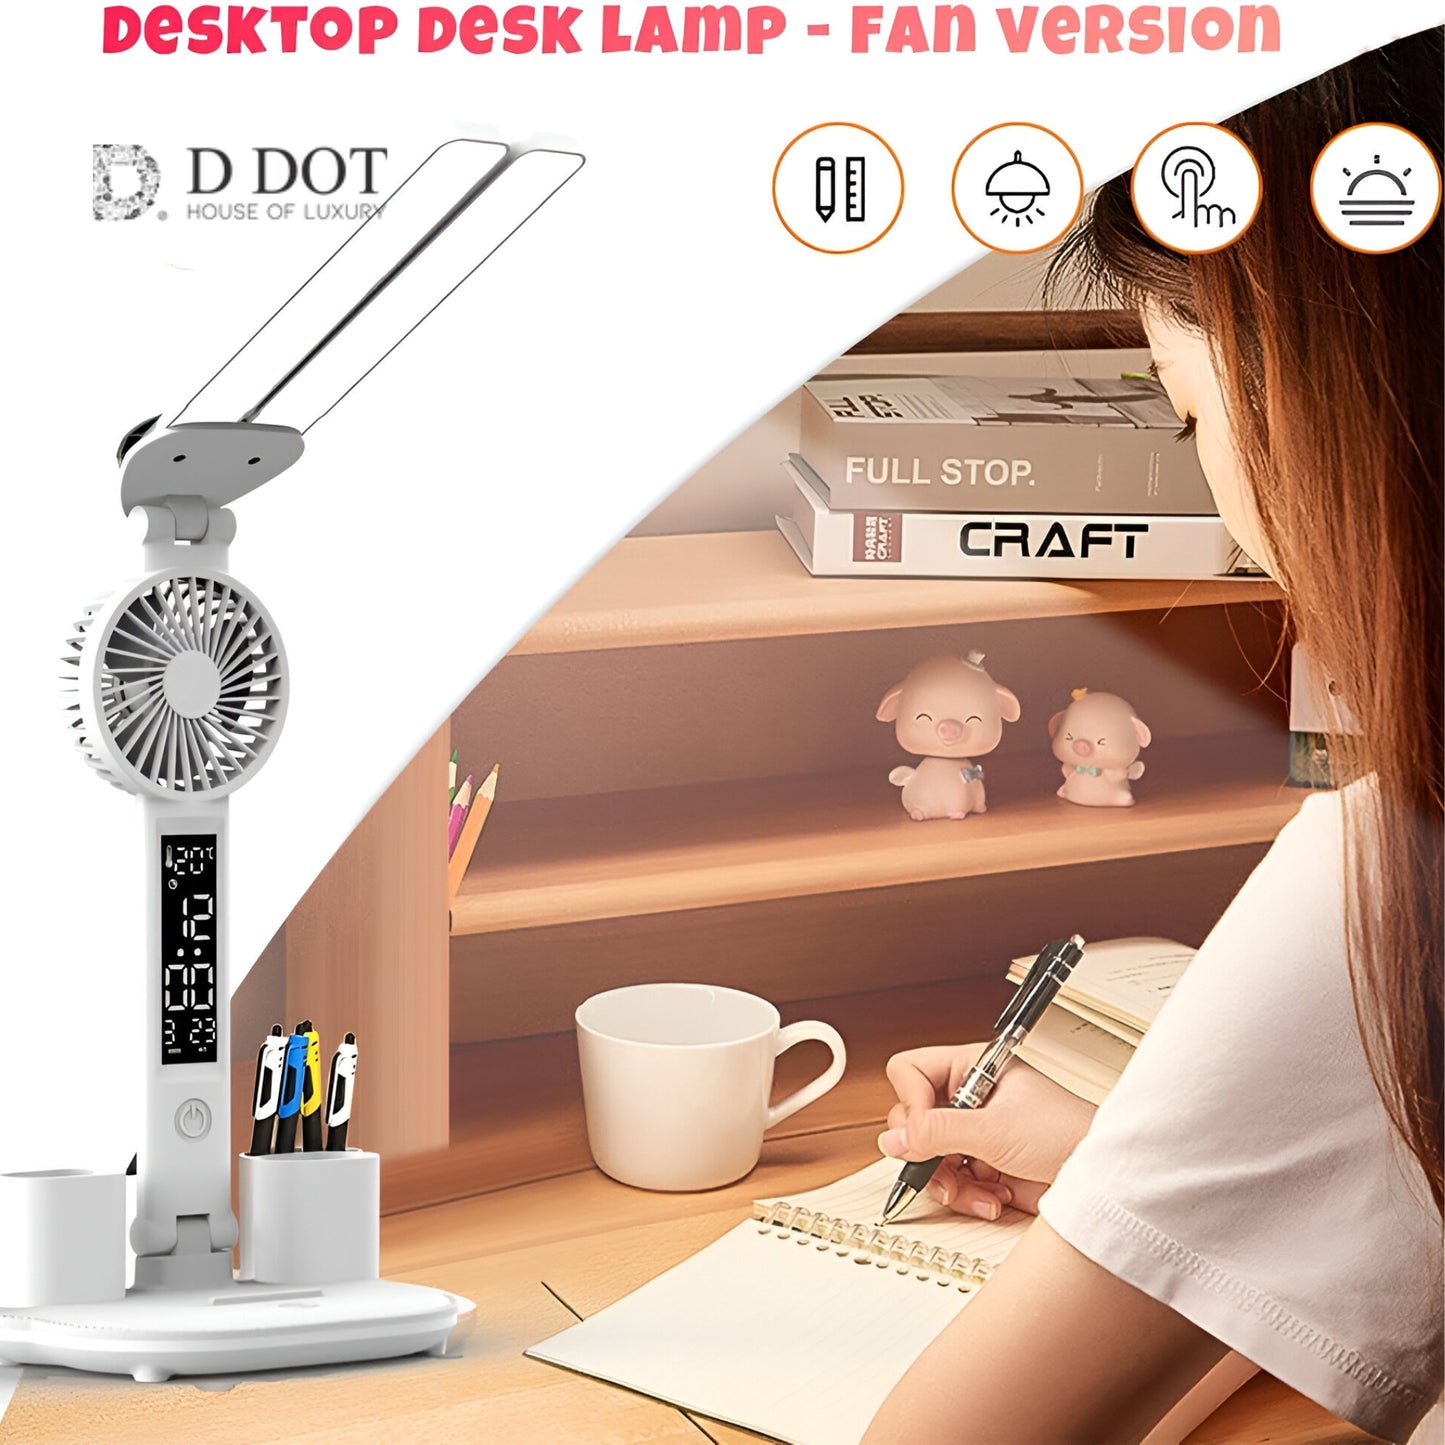 "Double Head Foldable LED Desk Lamp with Smart LED Display - Adjustable and Modern"